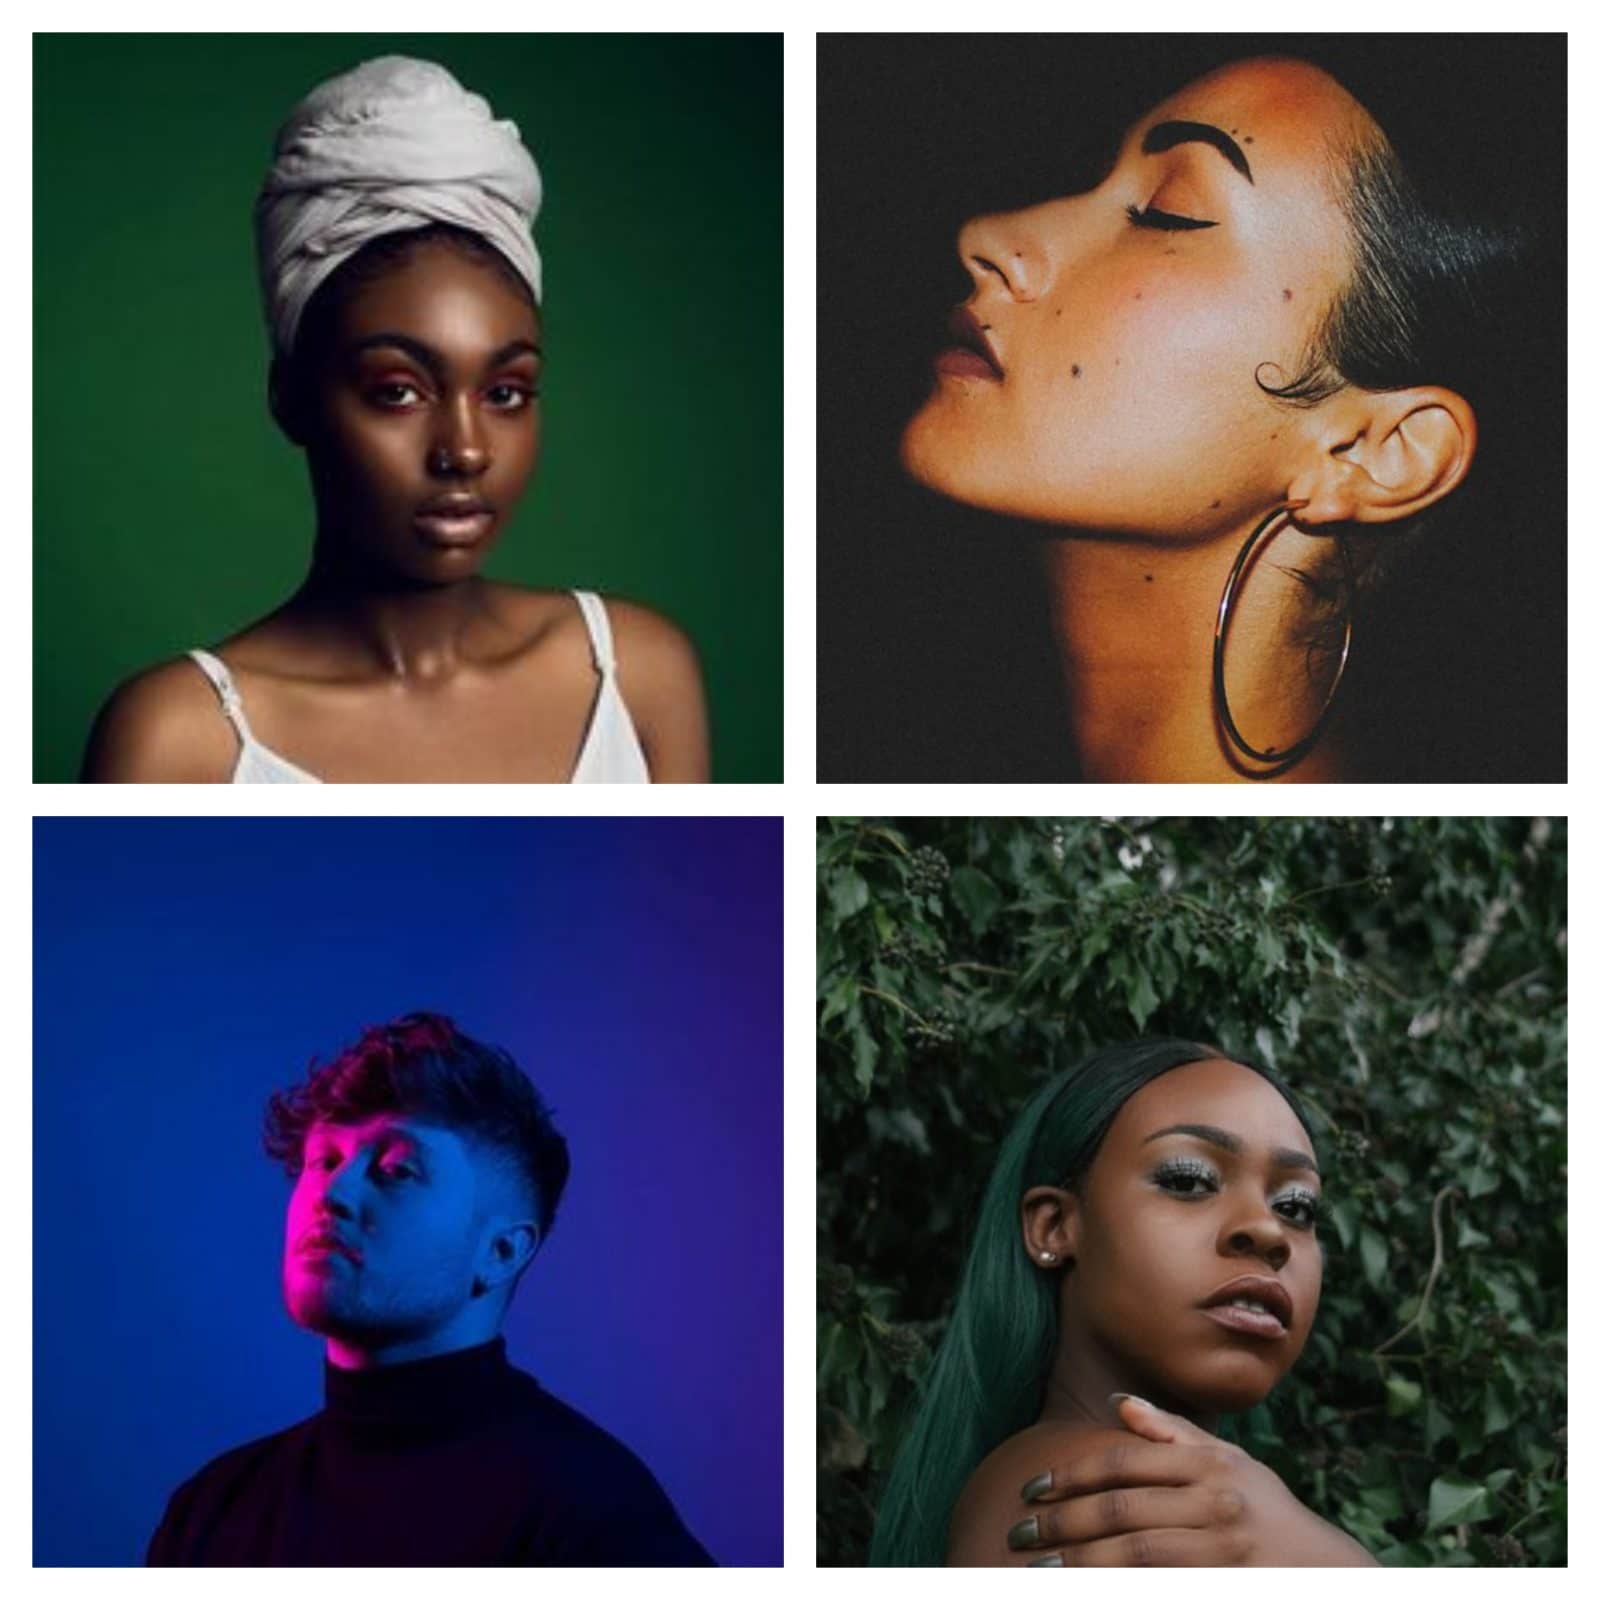 14 R&B / Soul Artists You Need to Know in 2019 The Blues Project